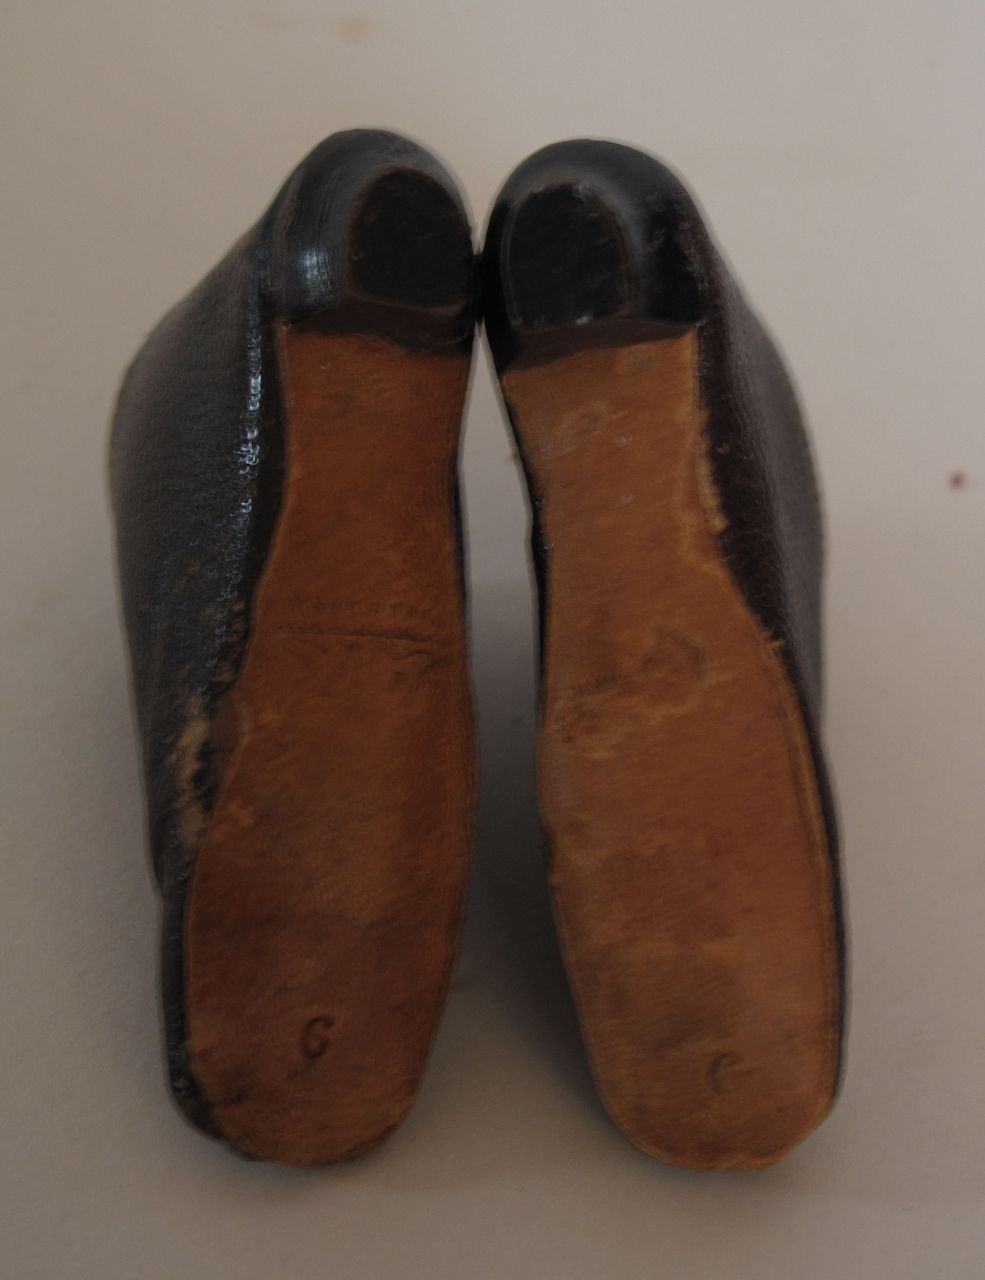 Very Early Heeled Demi - Boots for French Fashion, China or Paper from ...